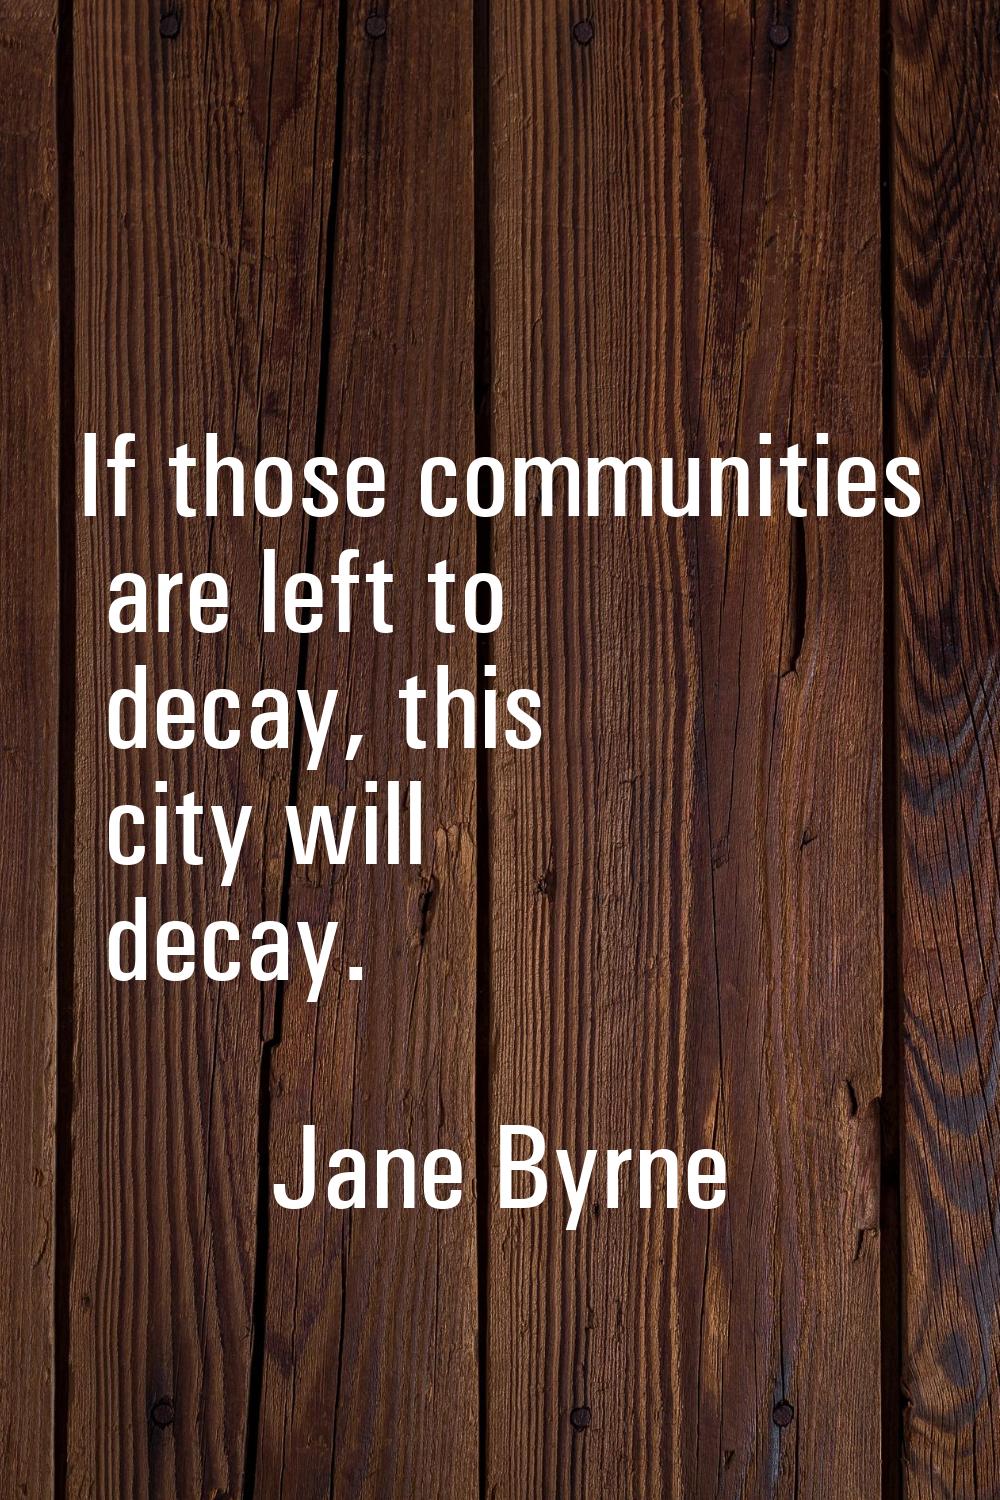 If those communities are left to decay, this city will decay.